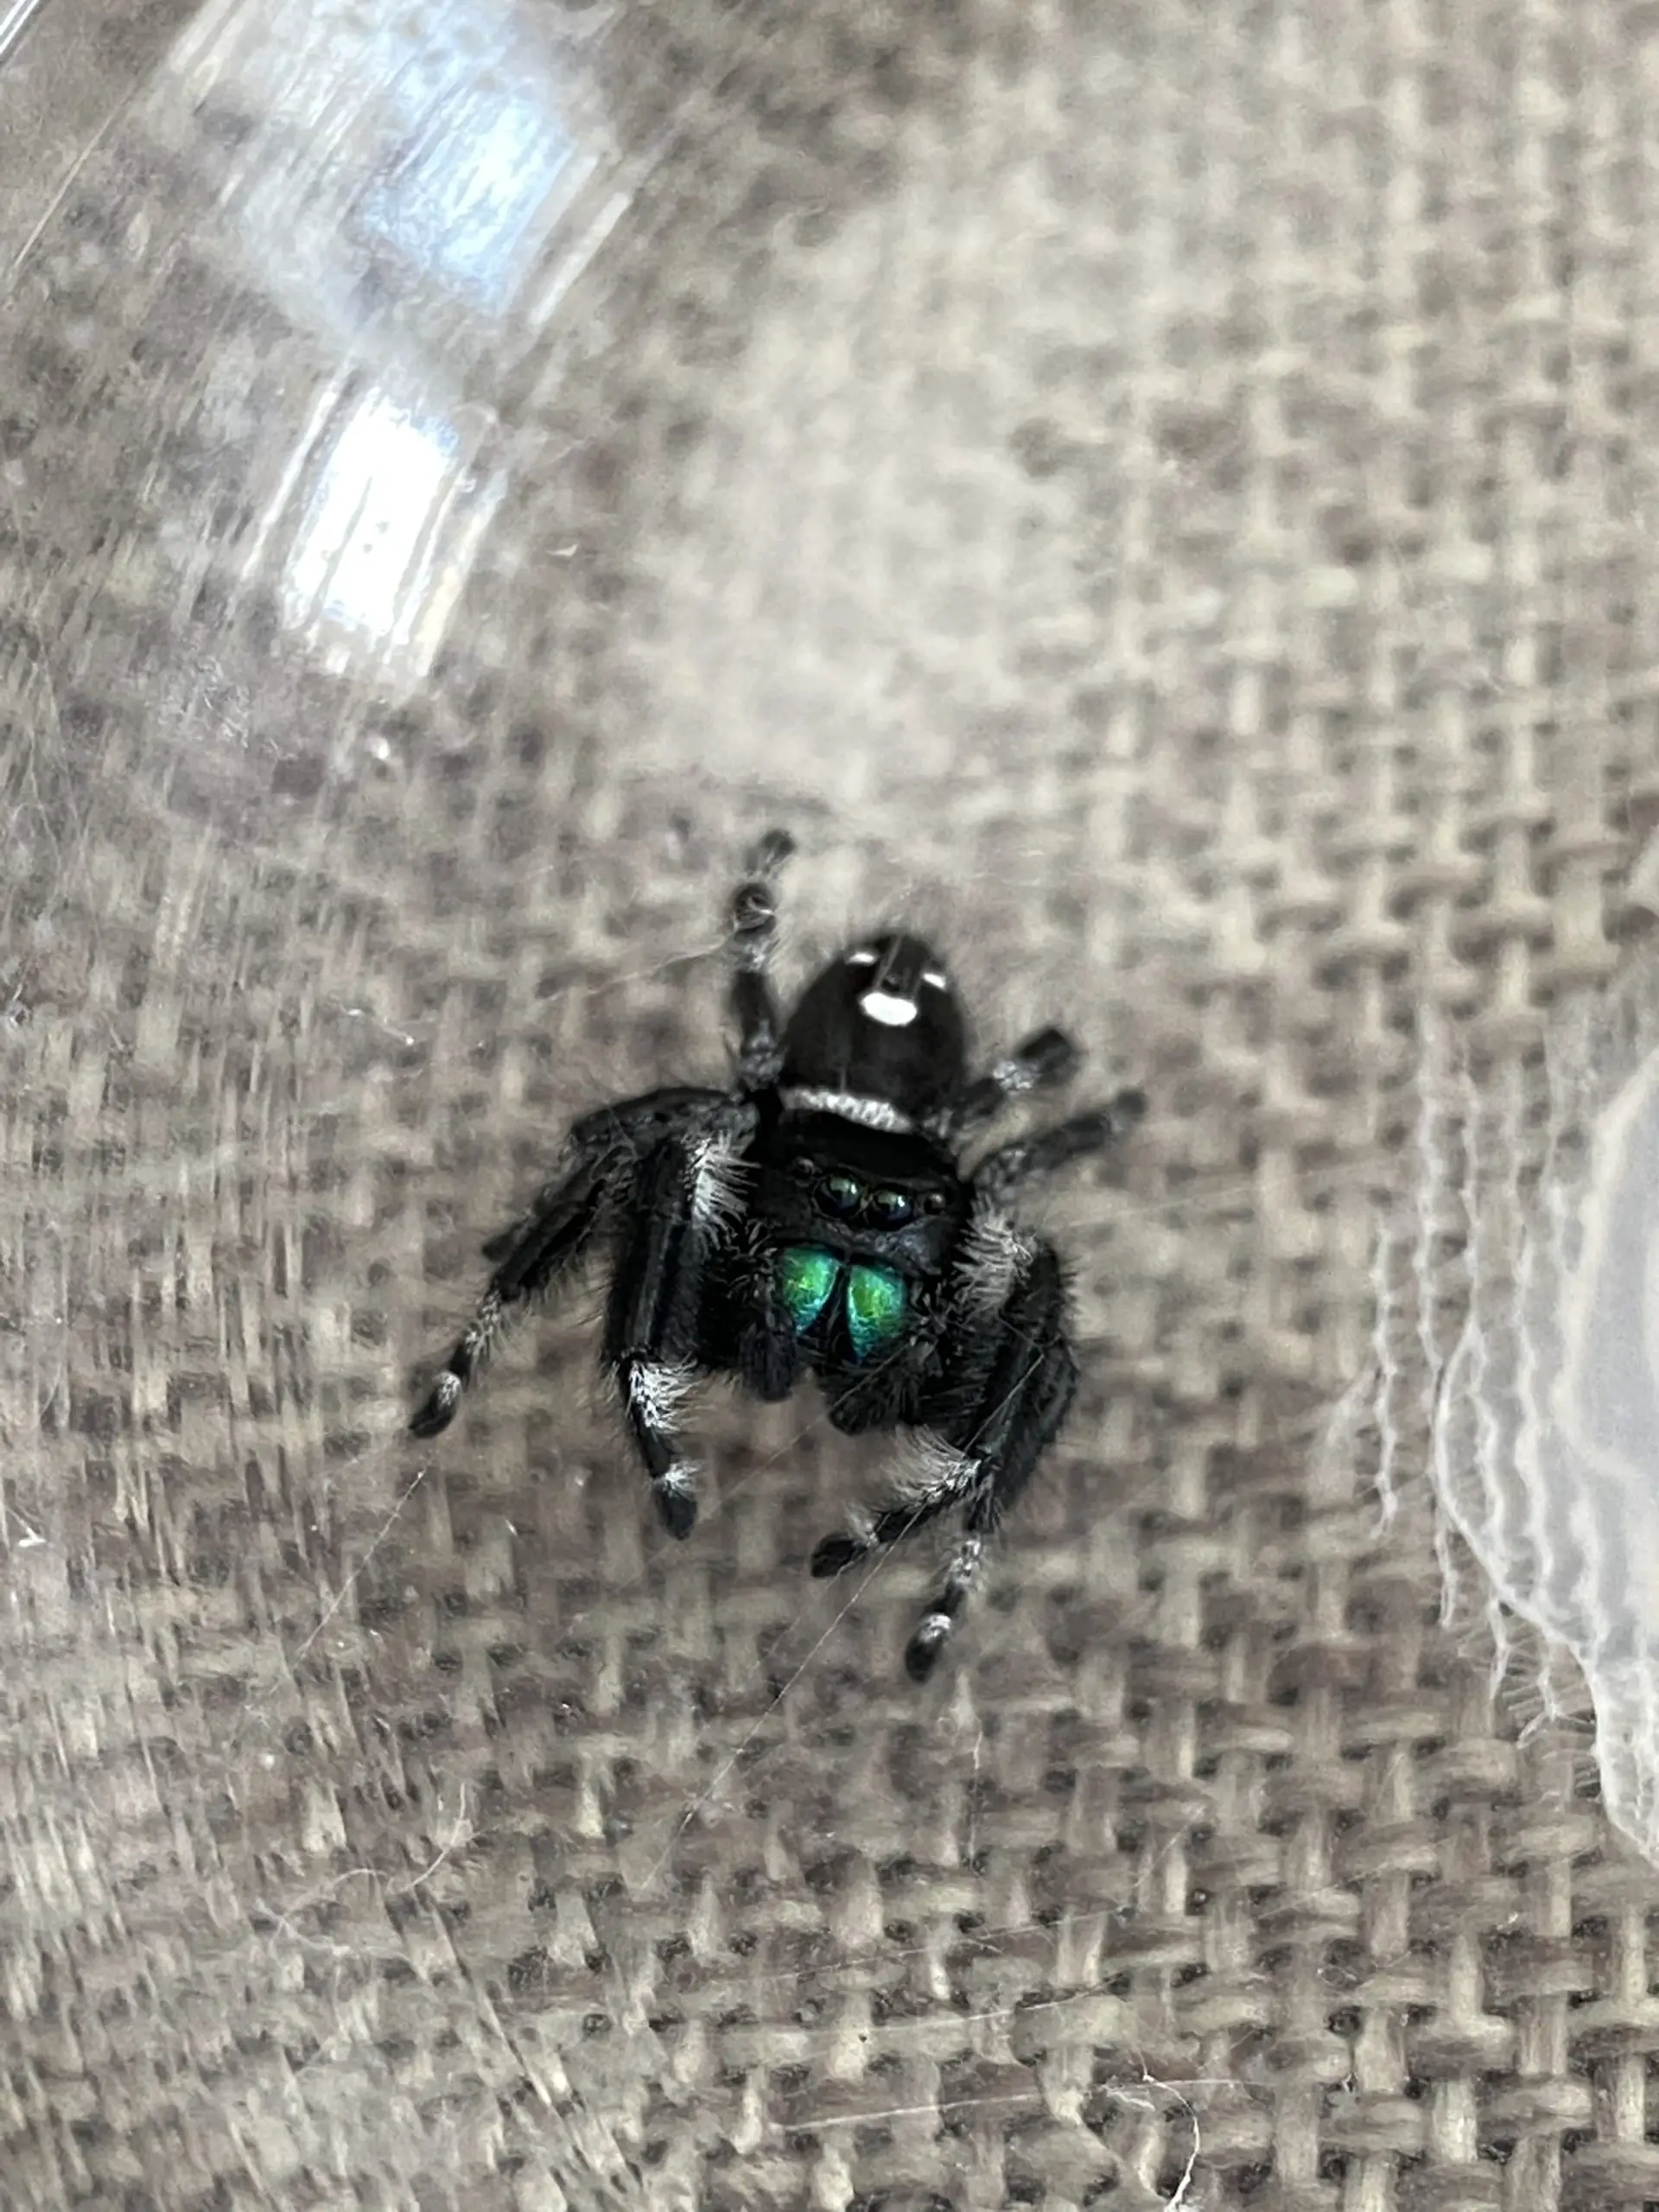 male regal jumping spider showing chelicerae